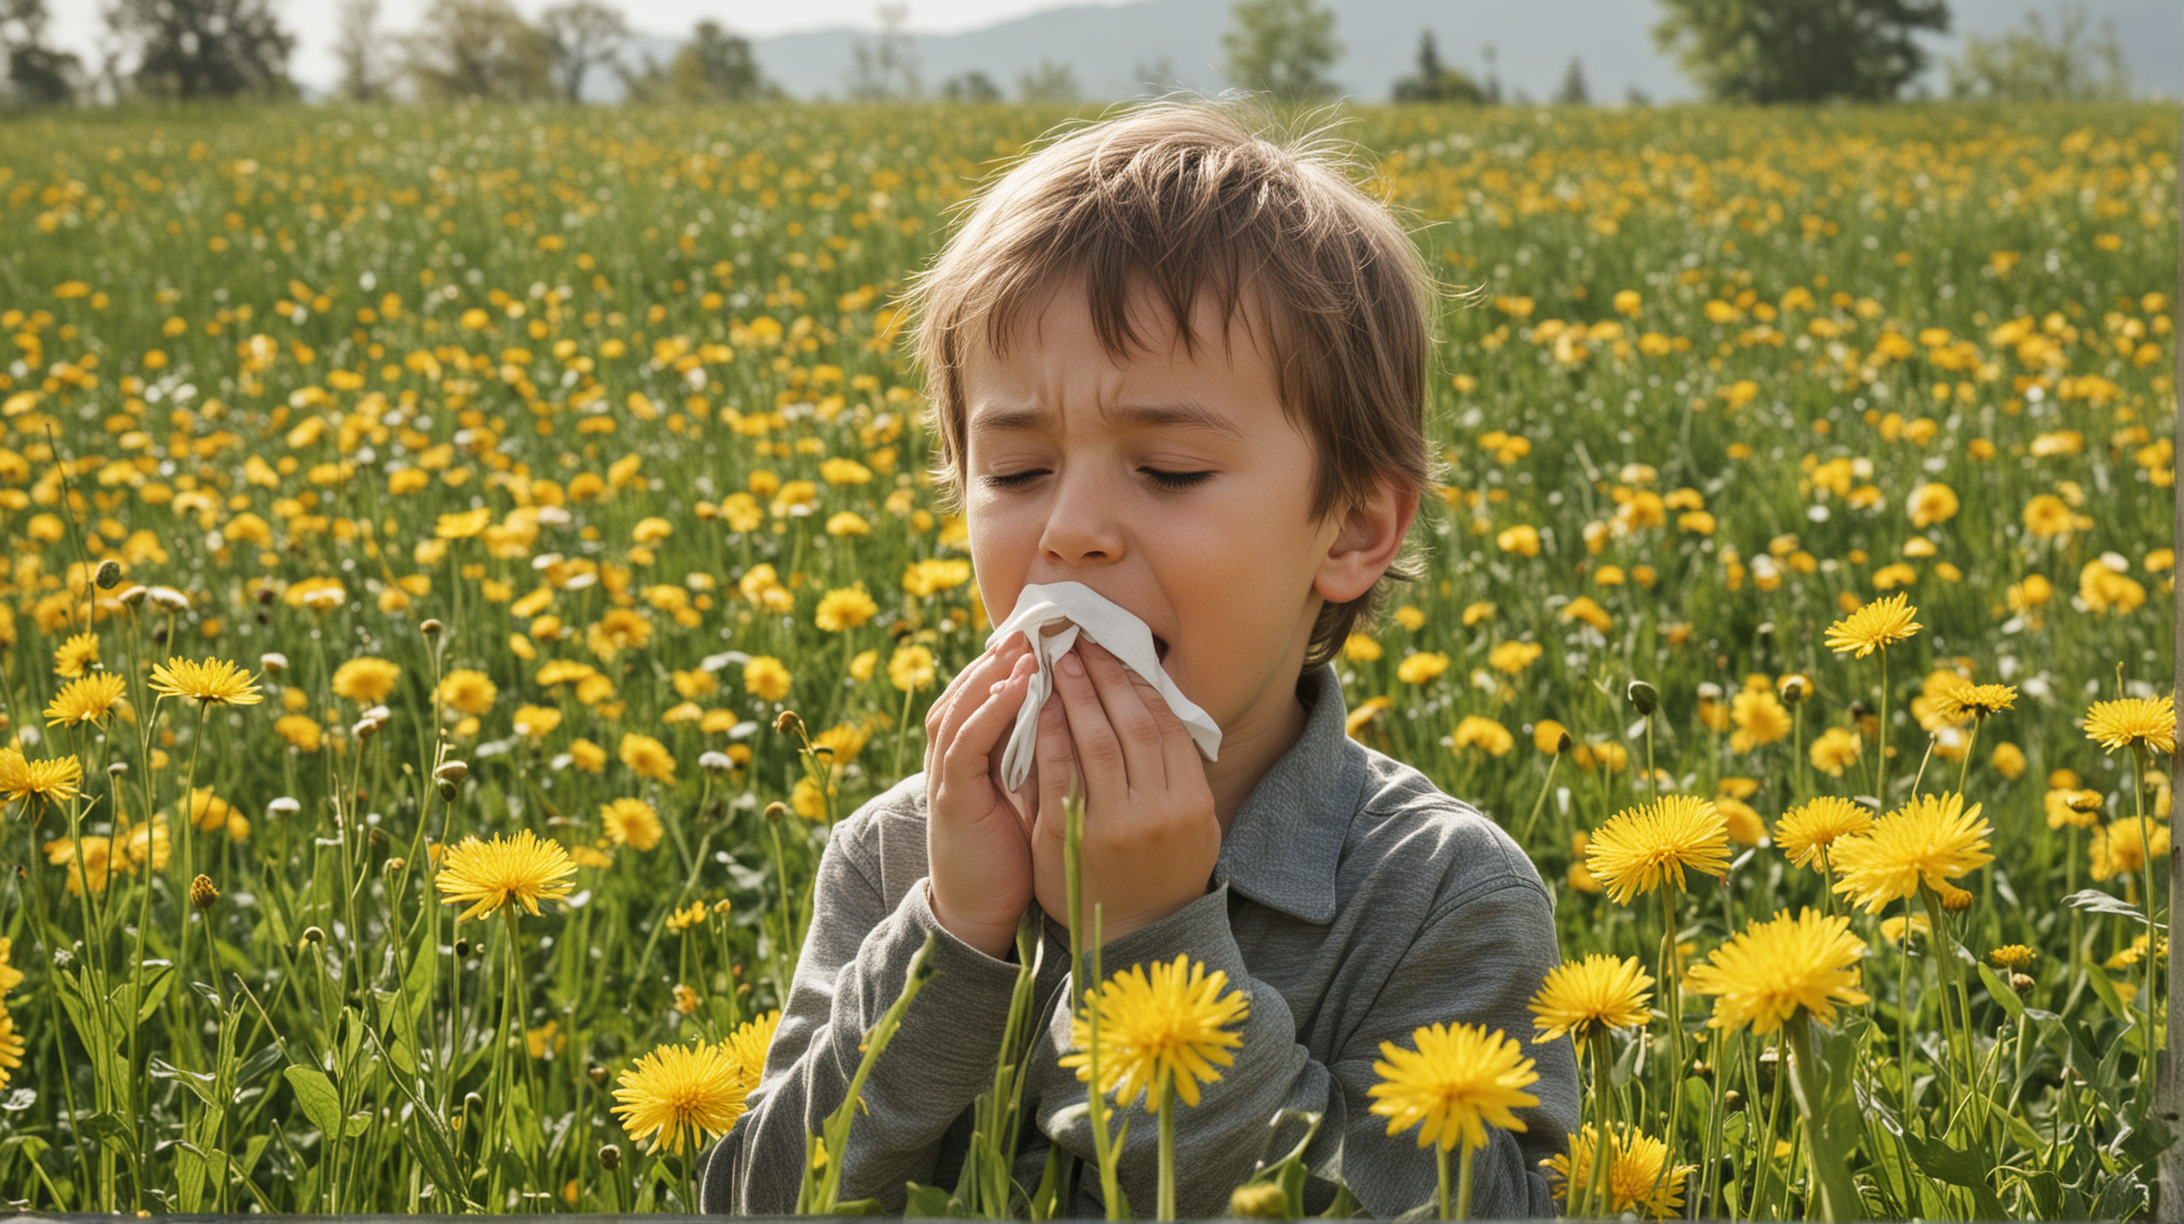 Child Sneezing Surrounded by Dandelions